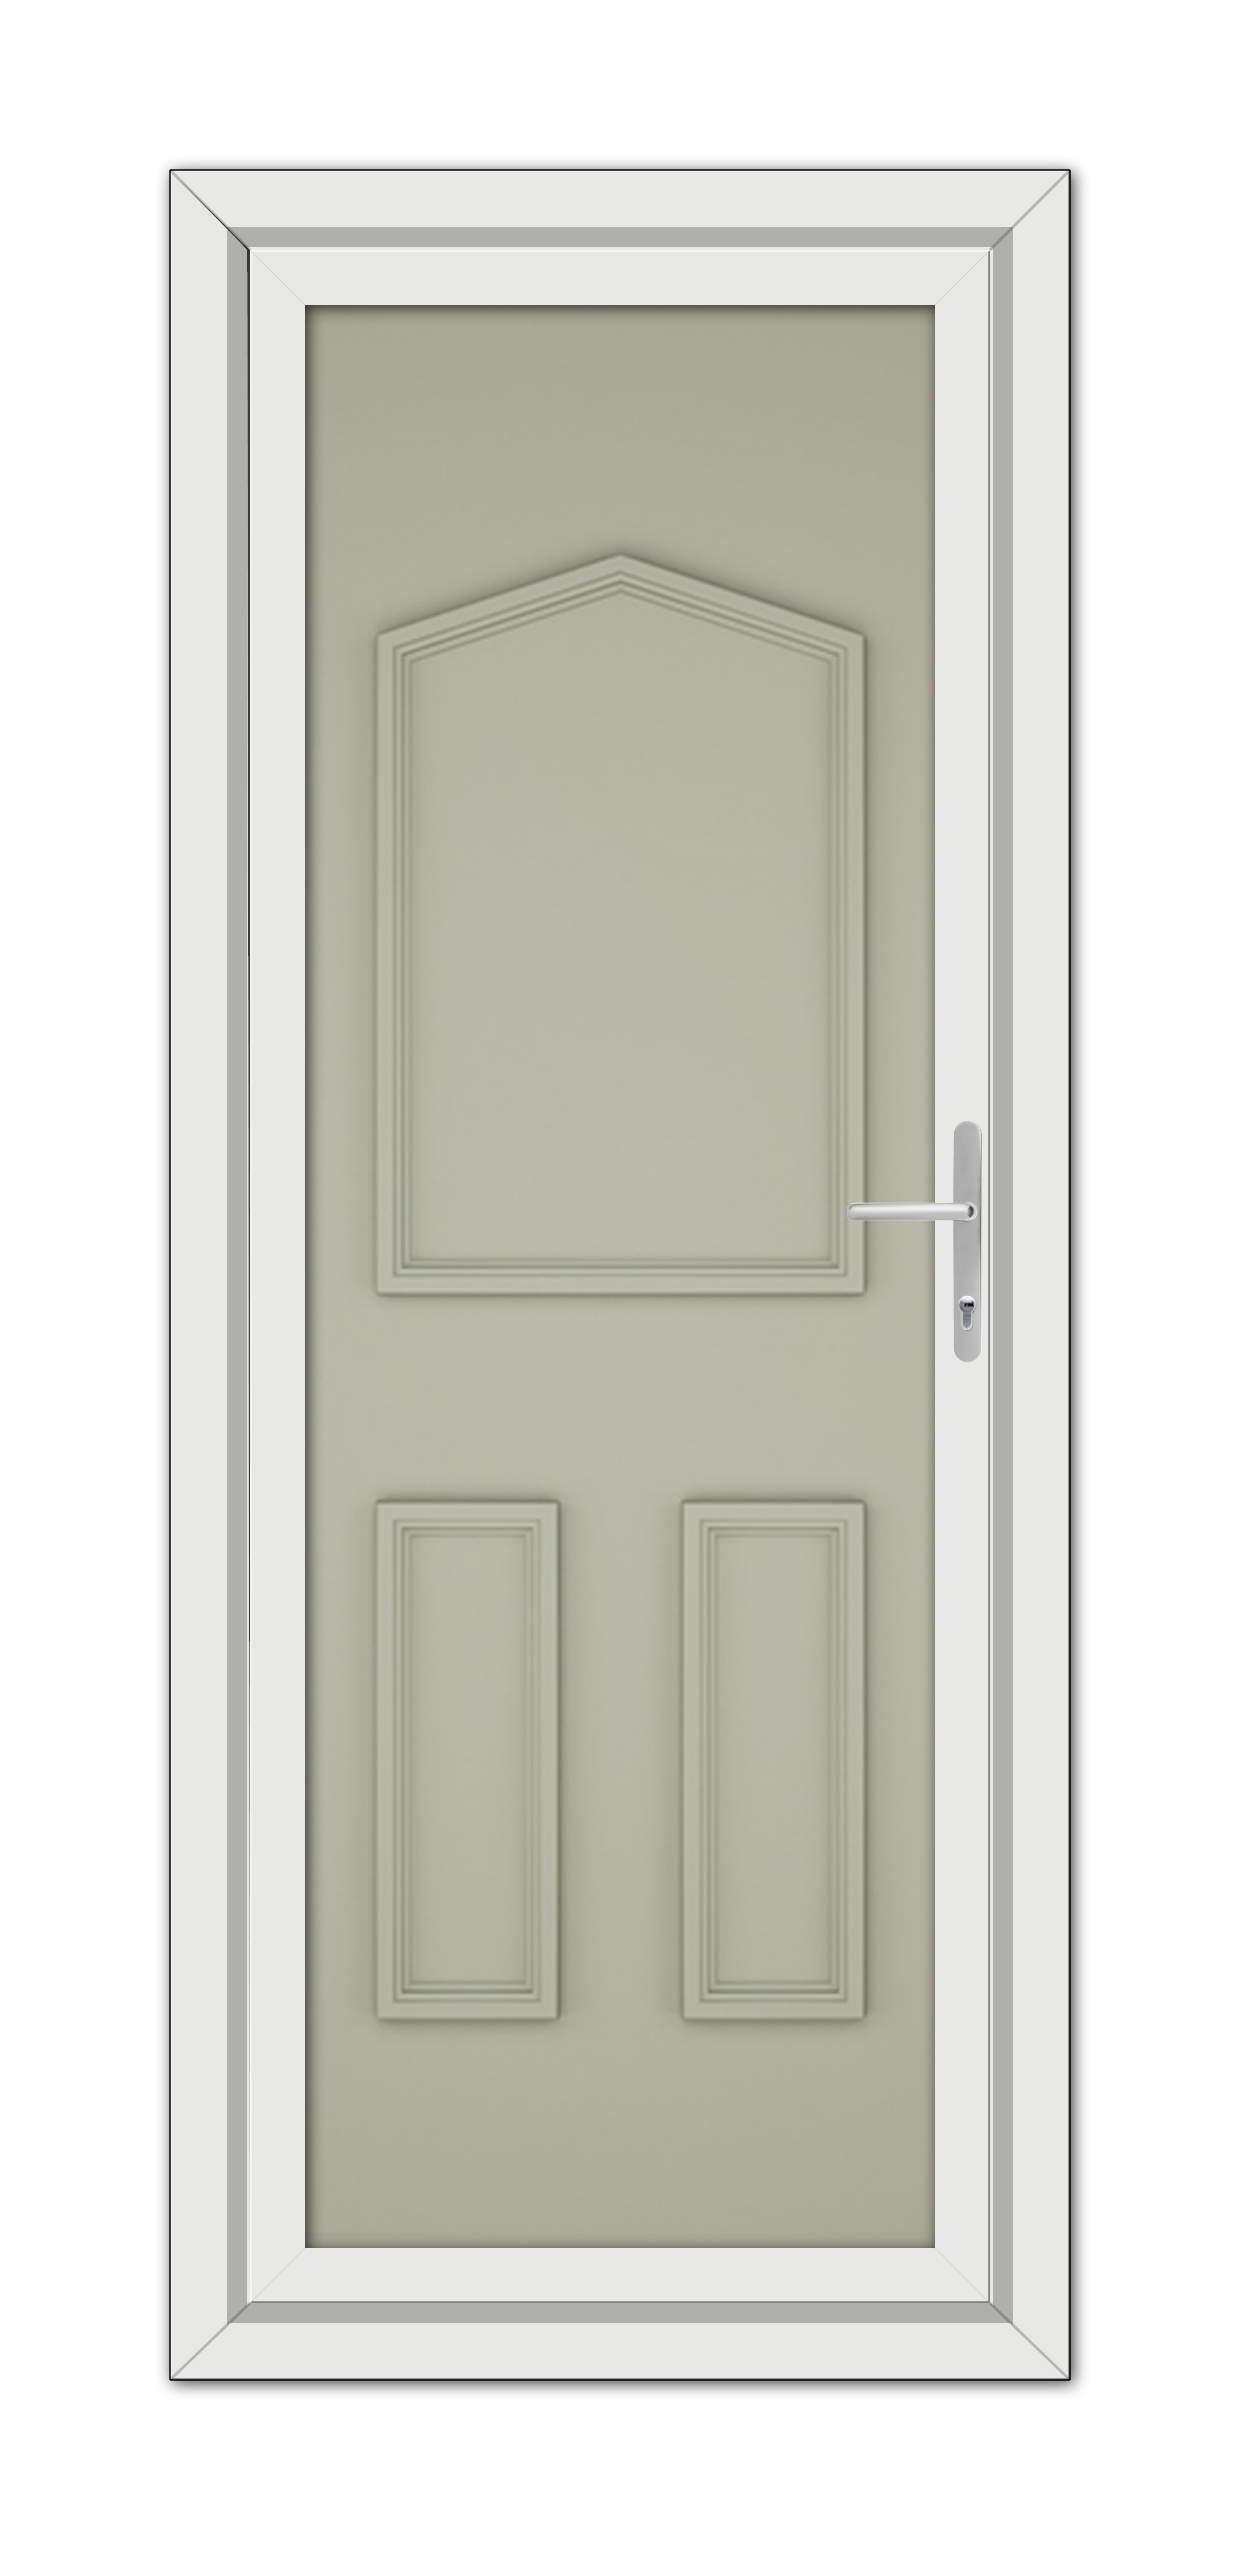 A closed Agate Grey Oxford Solid uPVC door with a silver handle, set within a white door frame, viewed from the front.